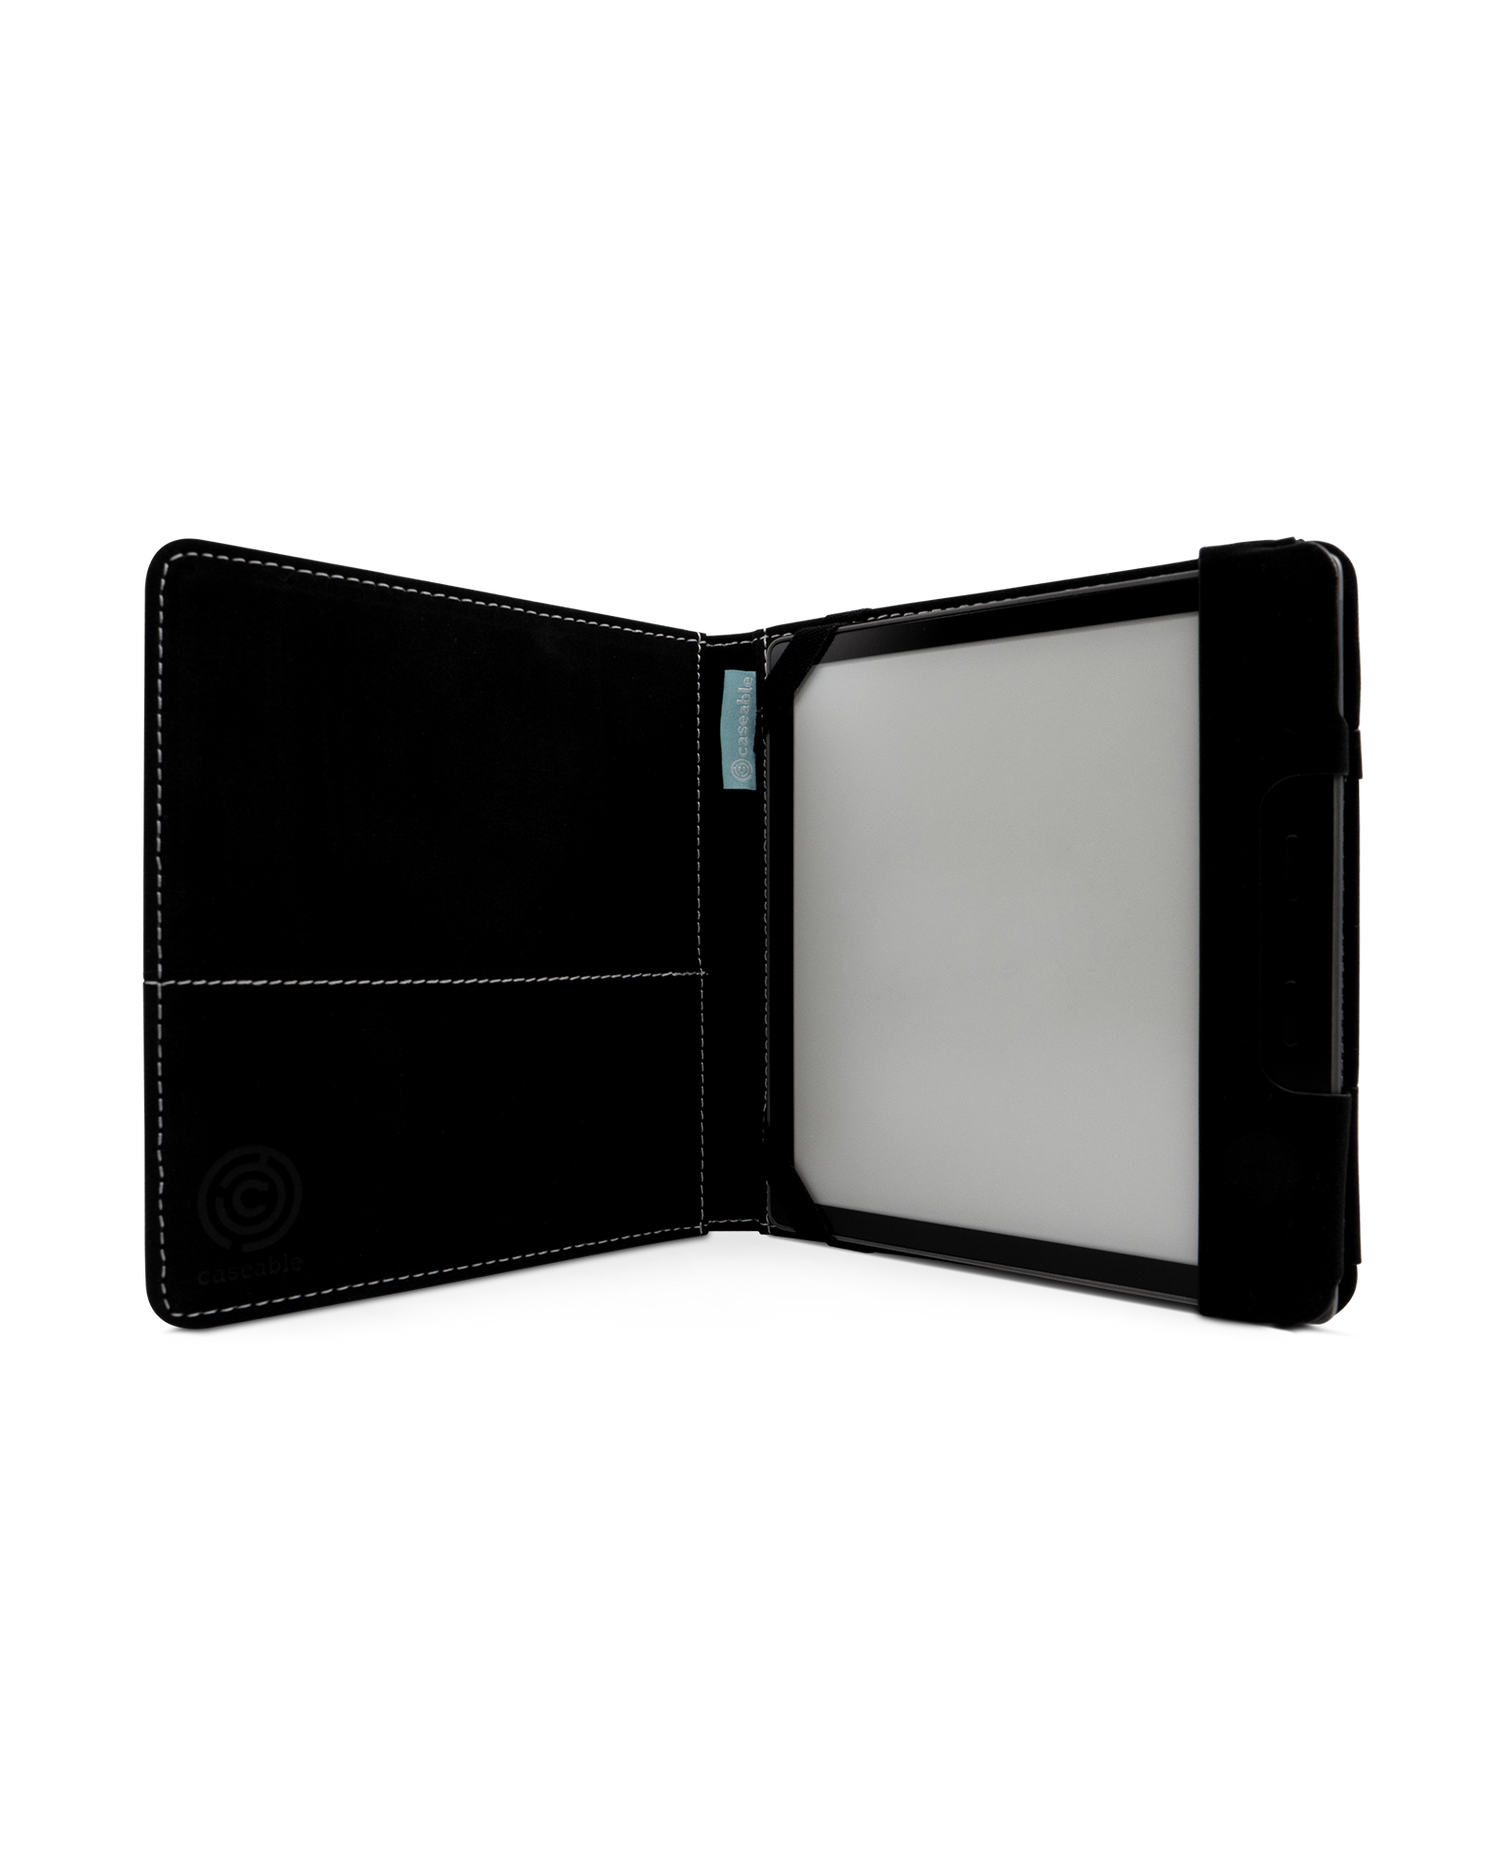 Midnight Marble eReader Case for tolino vision 6: Opened interior view